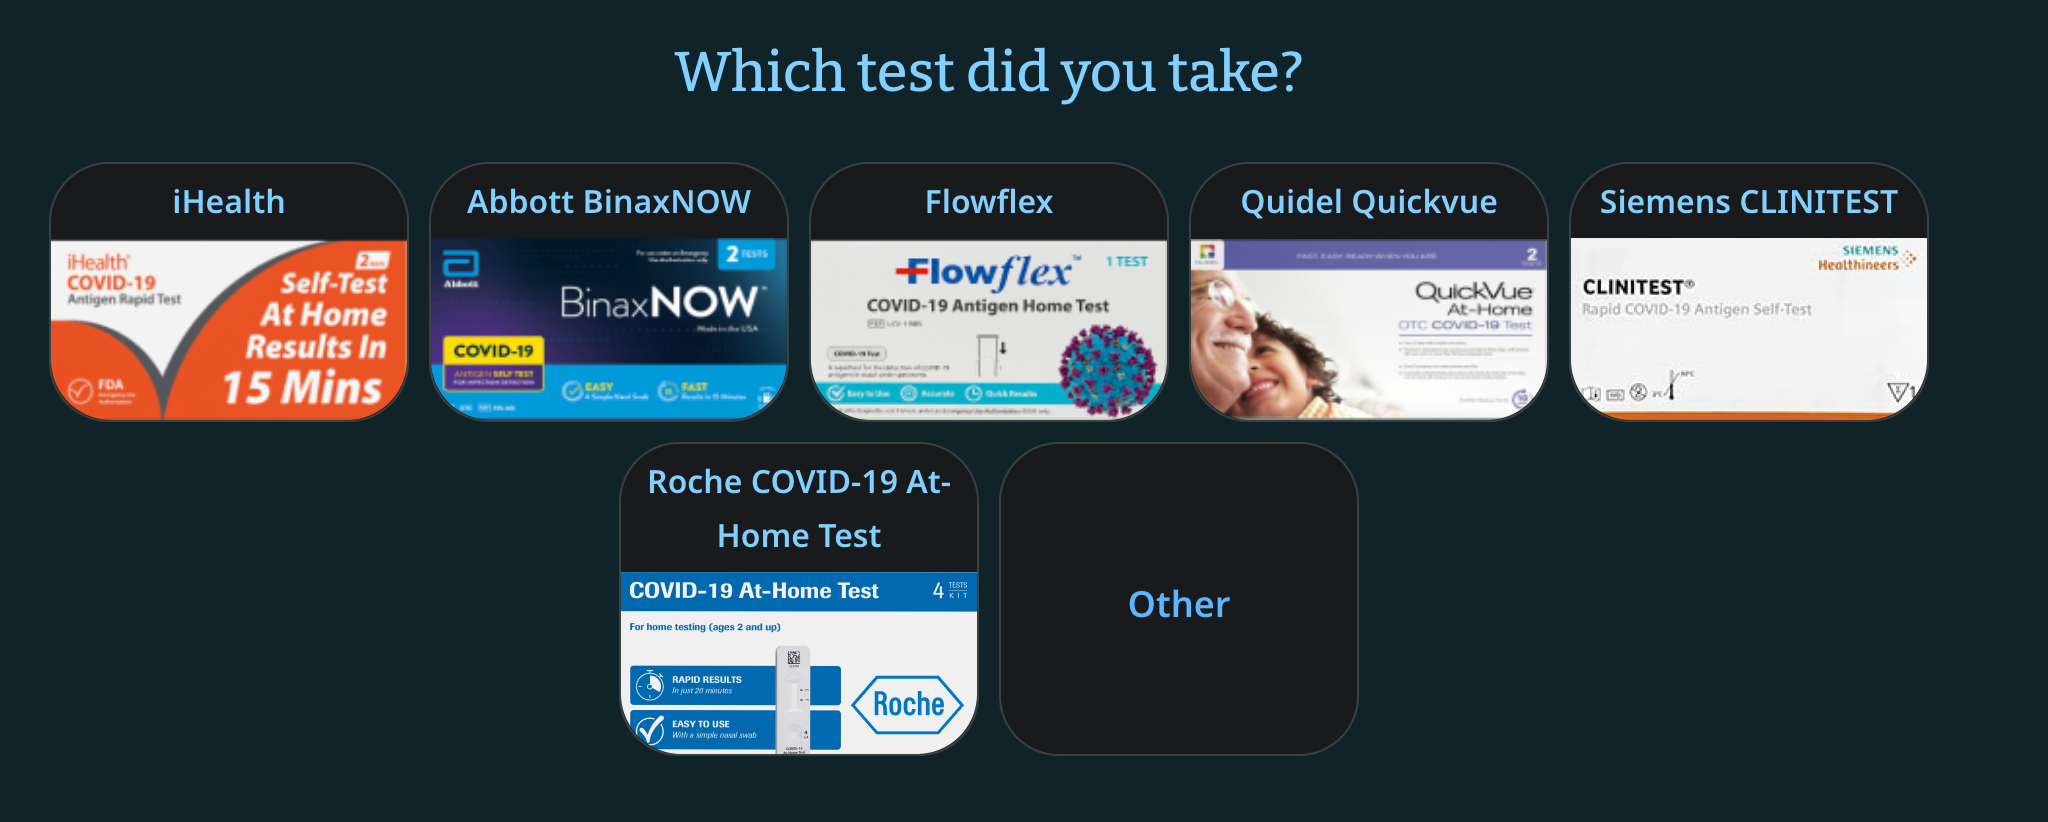 Image displays various brands of COVID-19 at-home test kits with a question above asking "Which test did you take?" Visible brands include iHealth, Abbott BinaxNOW, Flowflex, Quidel Quickvue, Siemens CLINITEST, Roche